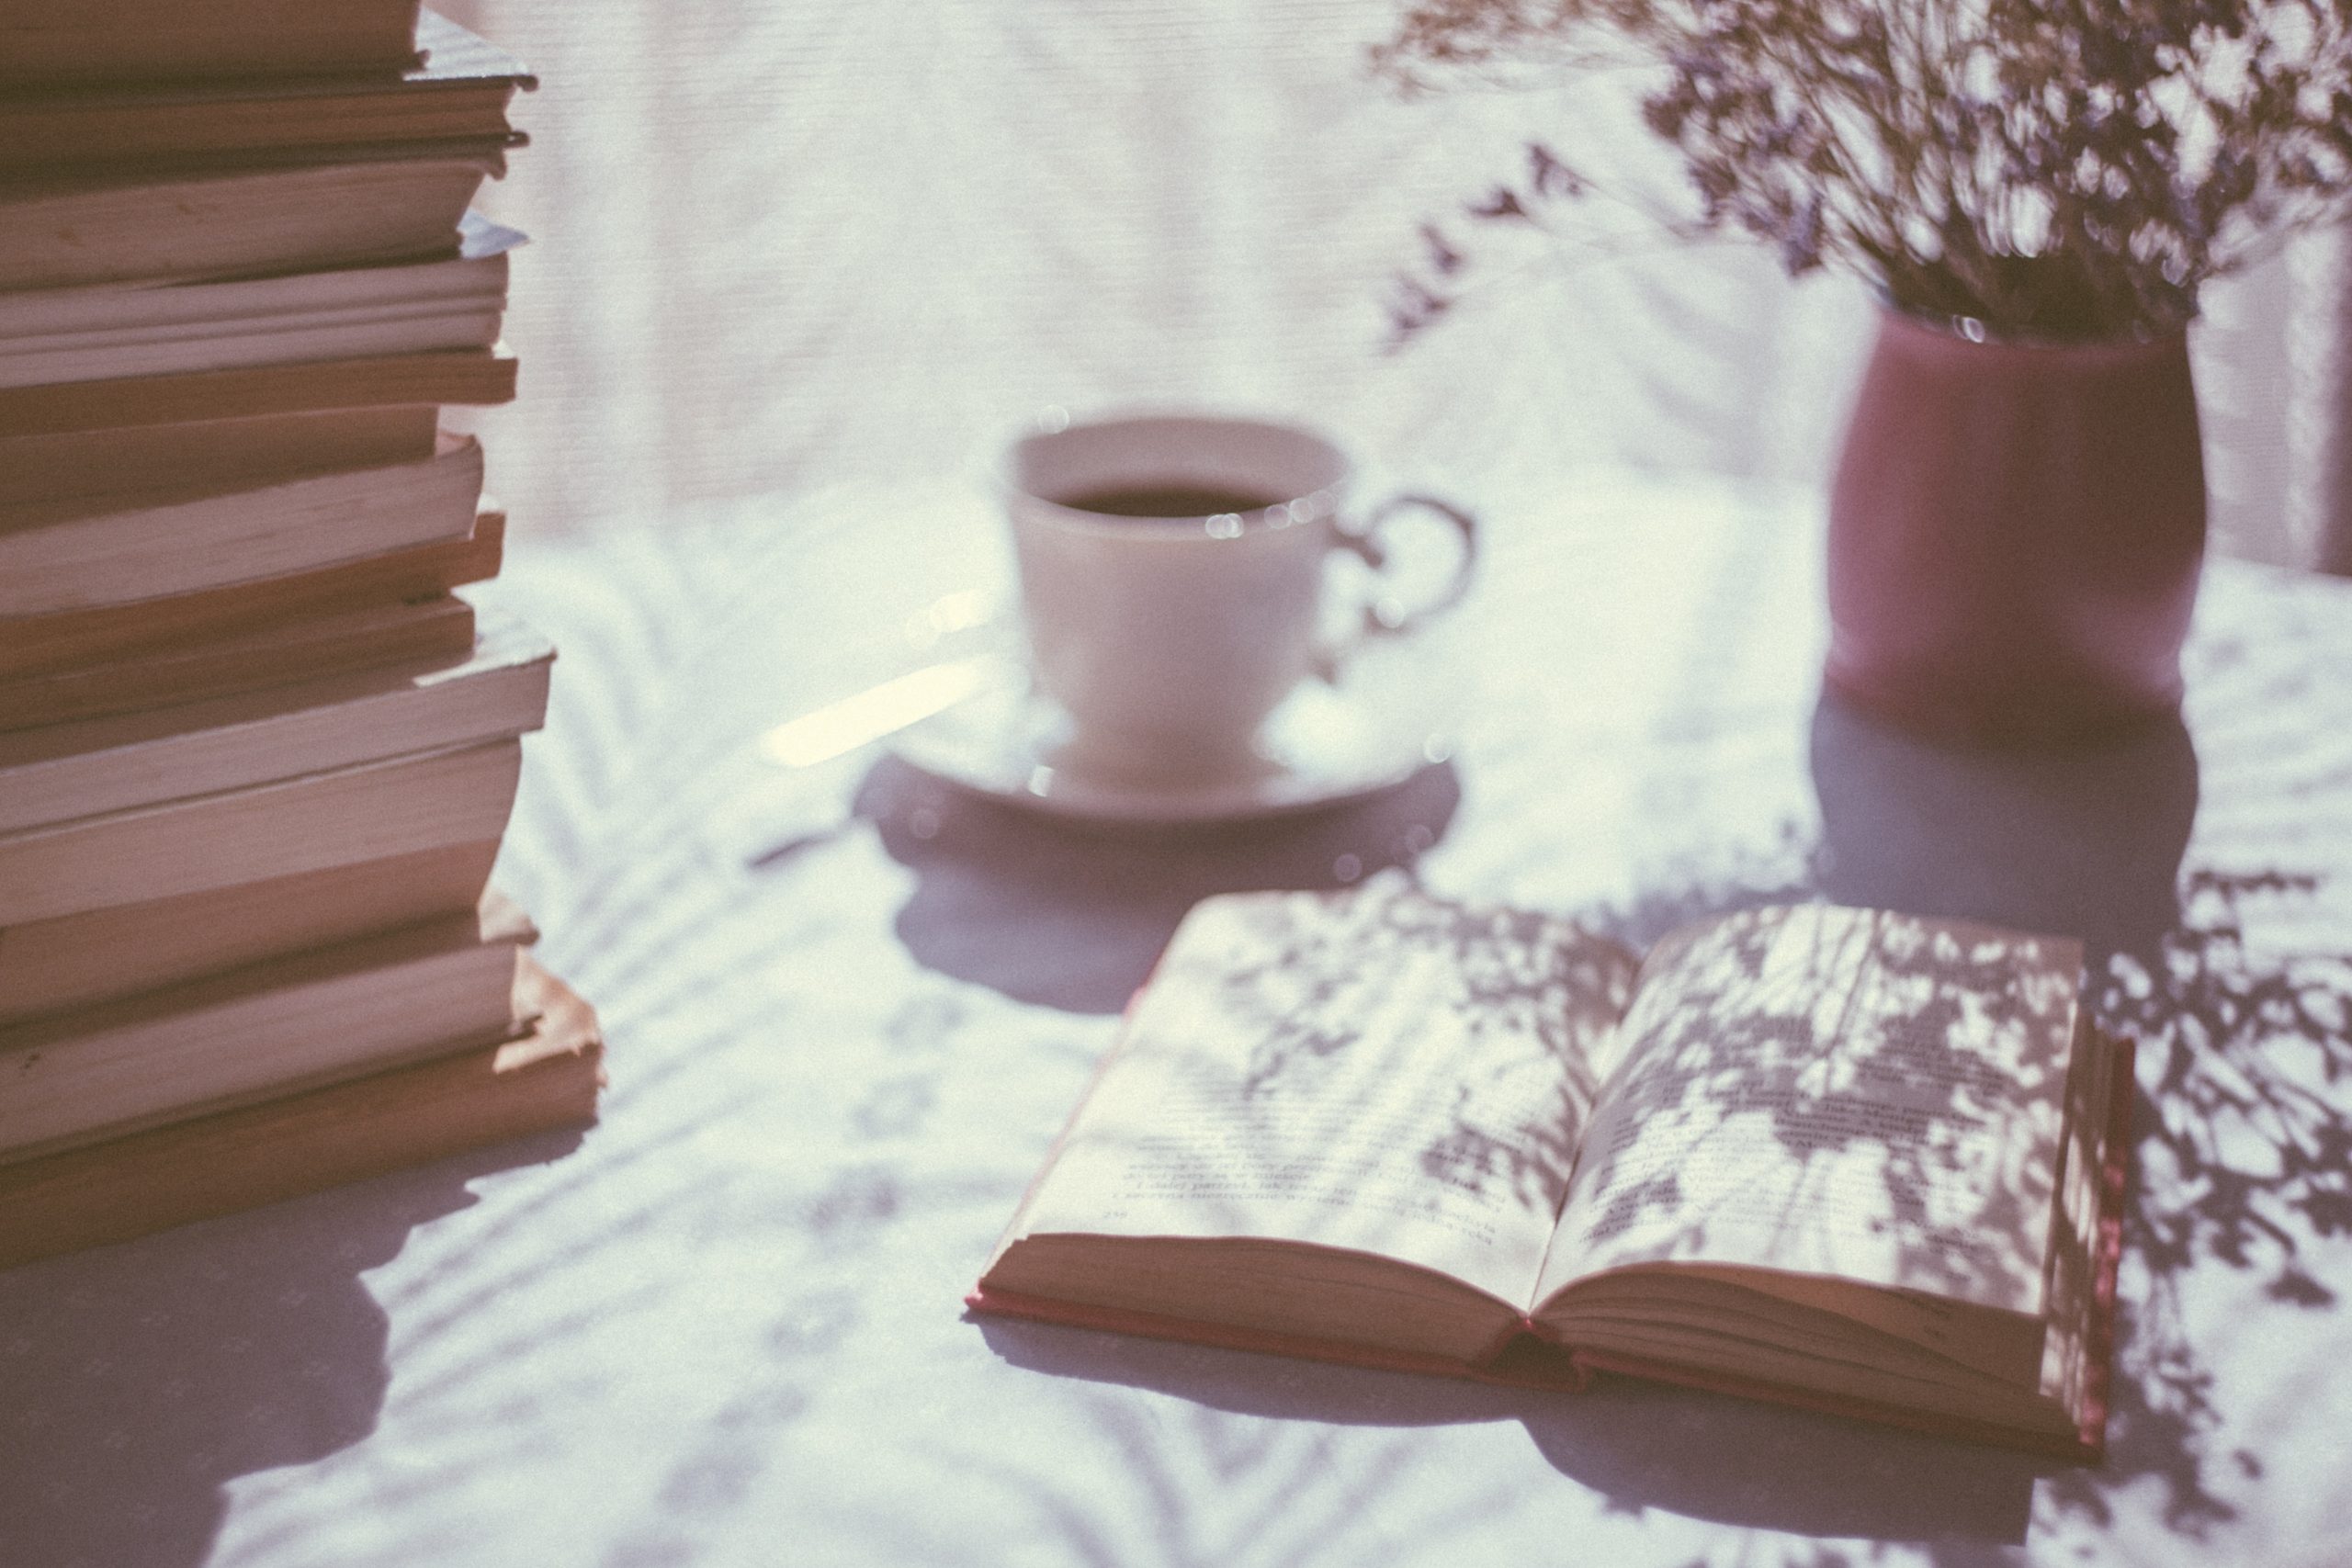 A pile of fantasy books, an open book, a teacup and a vase with flowers sitting on a table with sunlight shining down